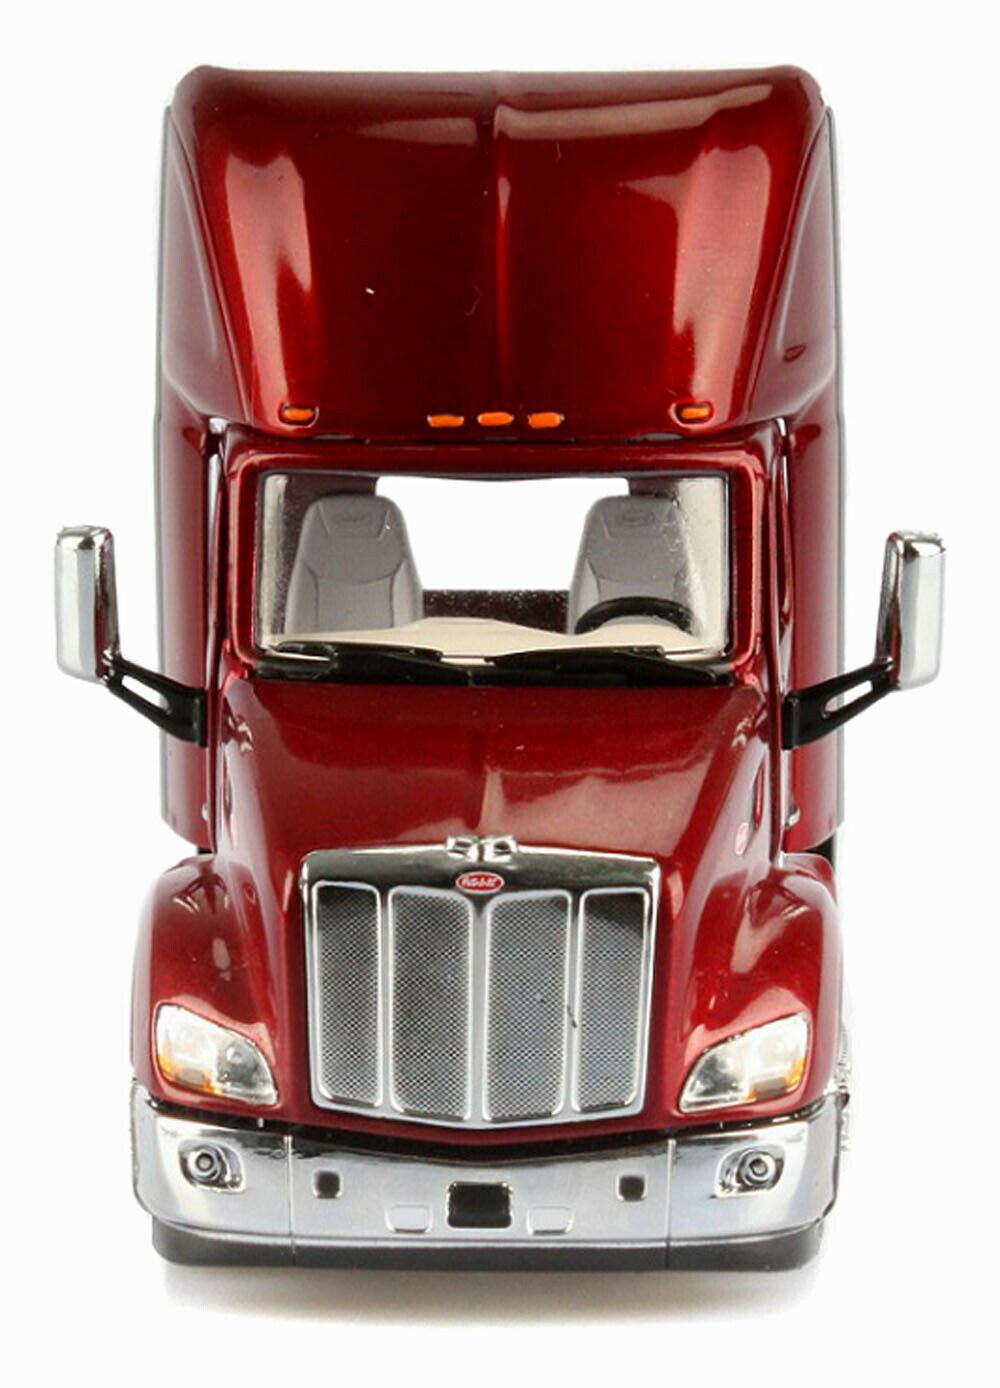 71068 Peterbilt 579 Day Cab Tractor Scale 1:50